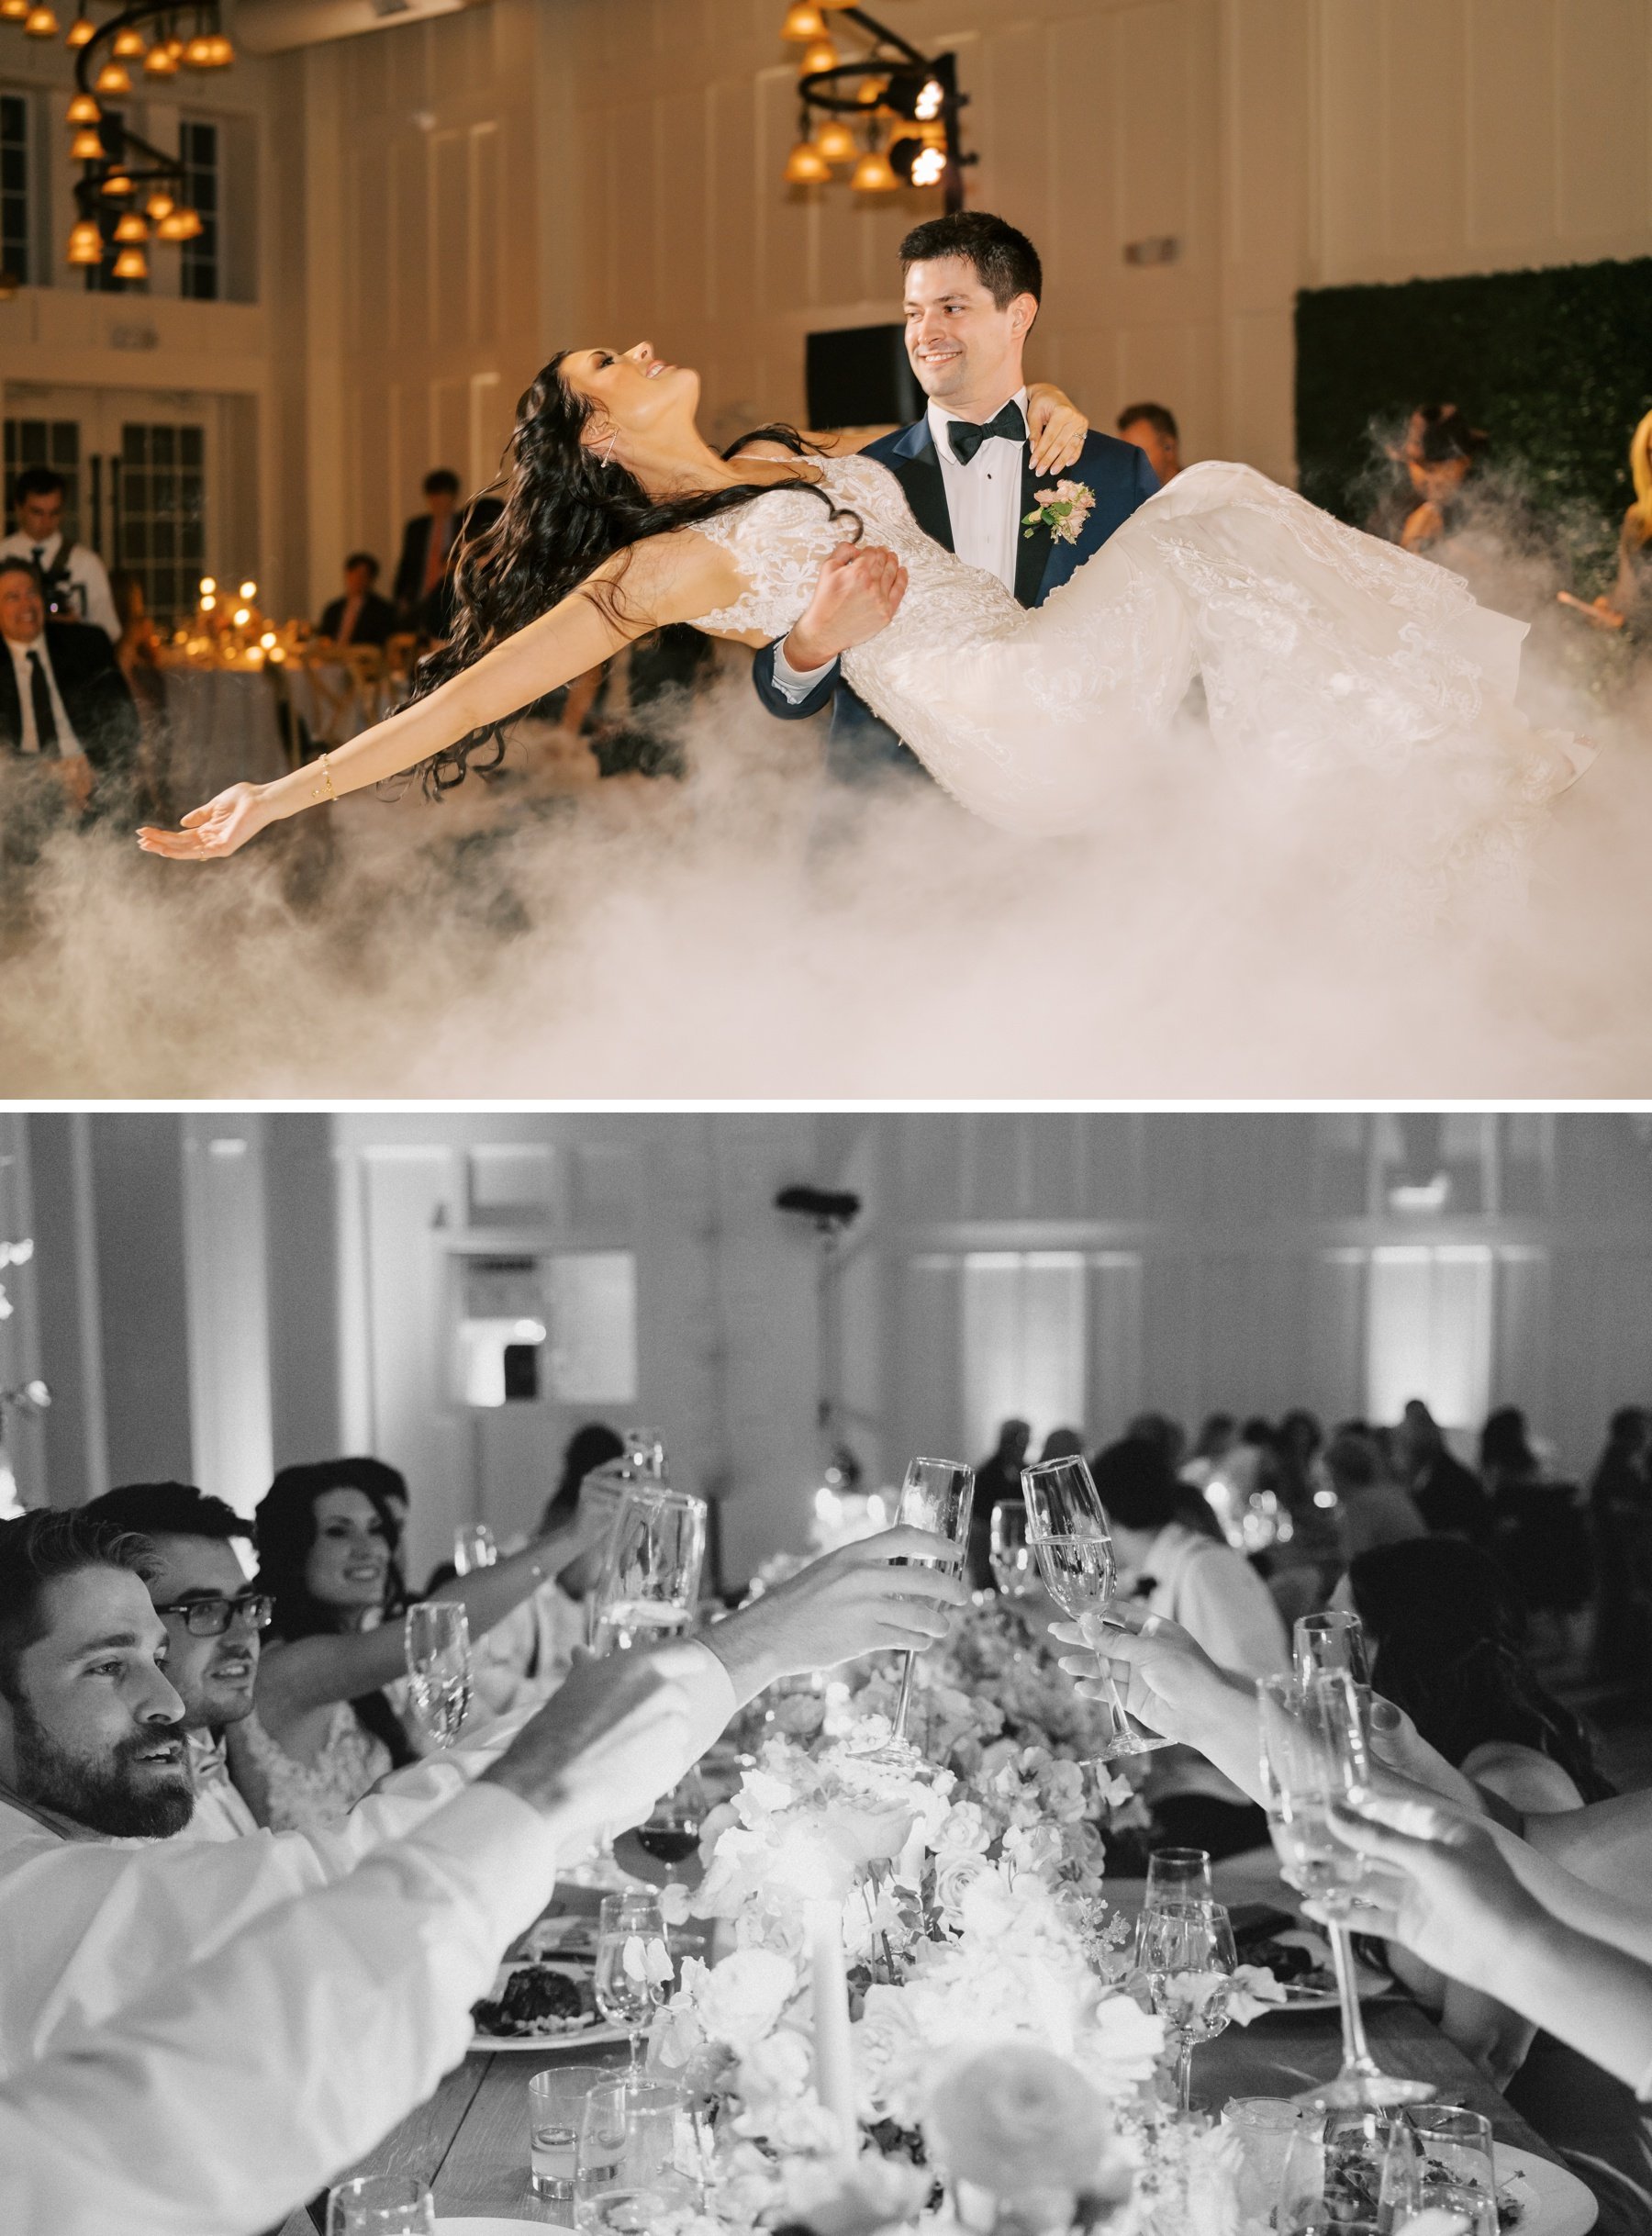 Bride and groom dancing on the clouds for their first dance